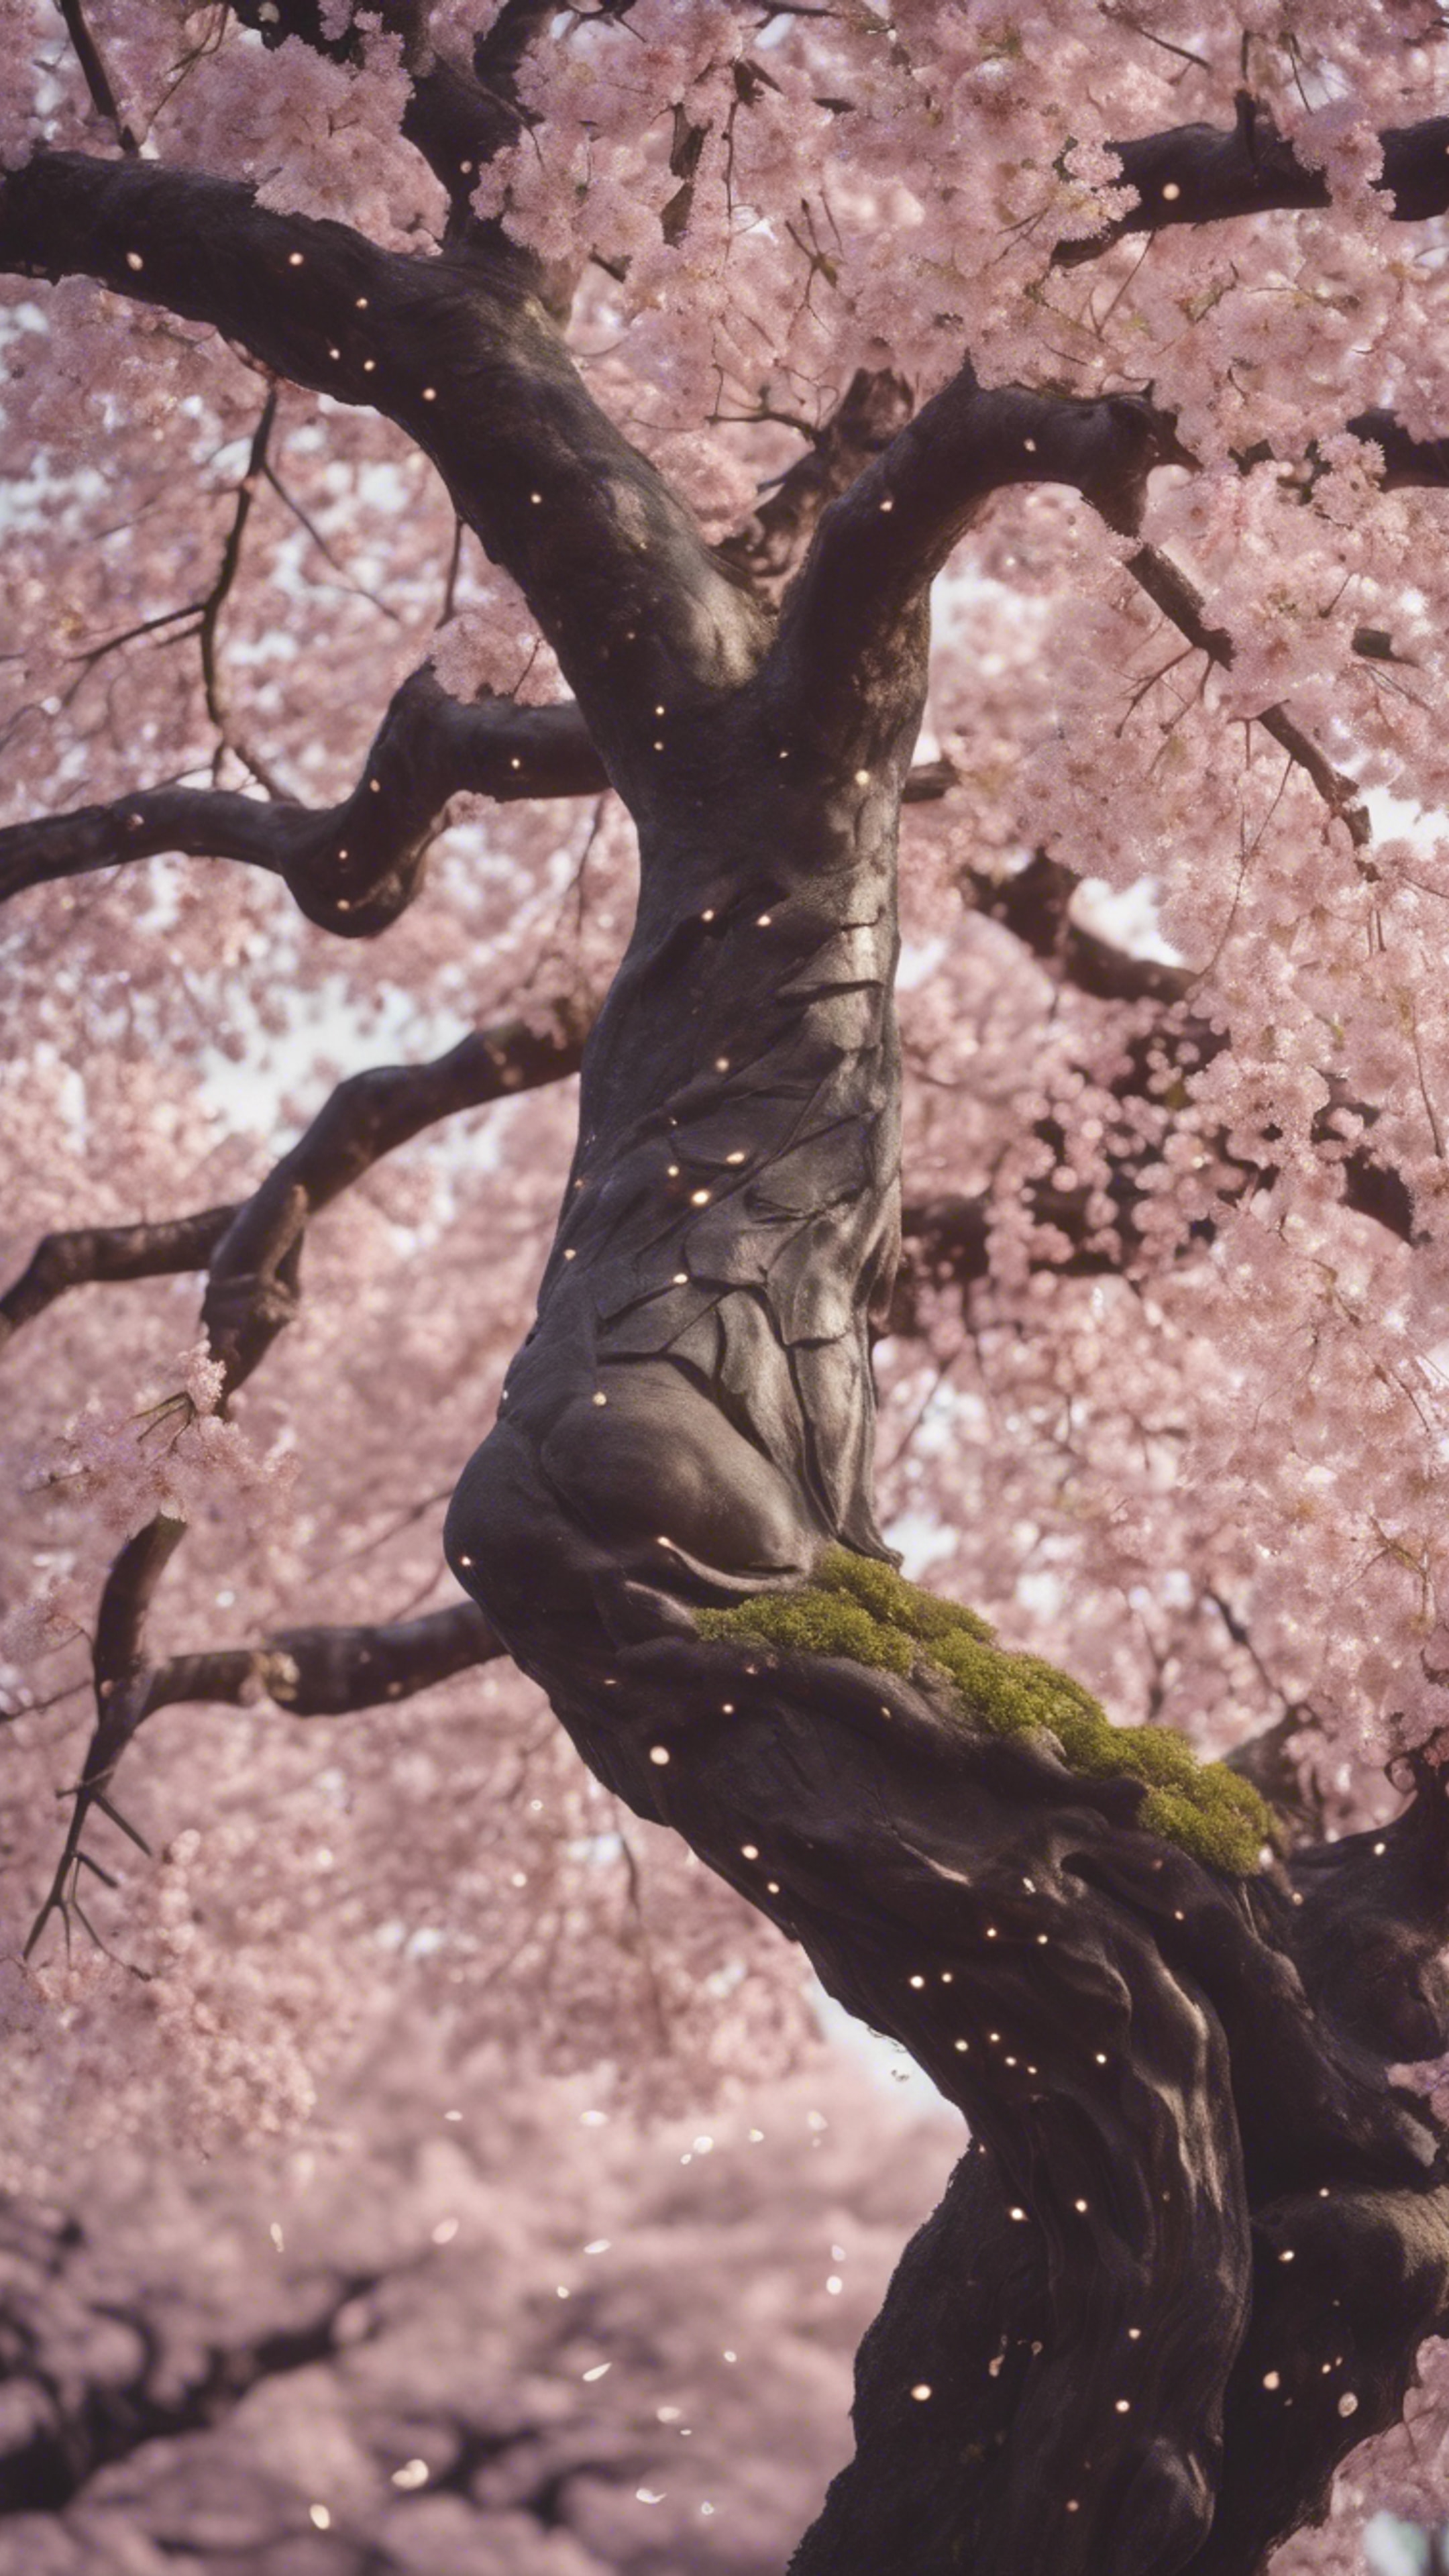 During the Hanami festival, cherry blossoms fall around a weeping willow sculpted to resemble the constellation of Sagittarius.壁紙[5579ba0d91714d72b64d]